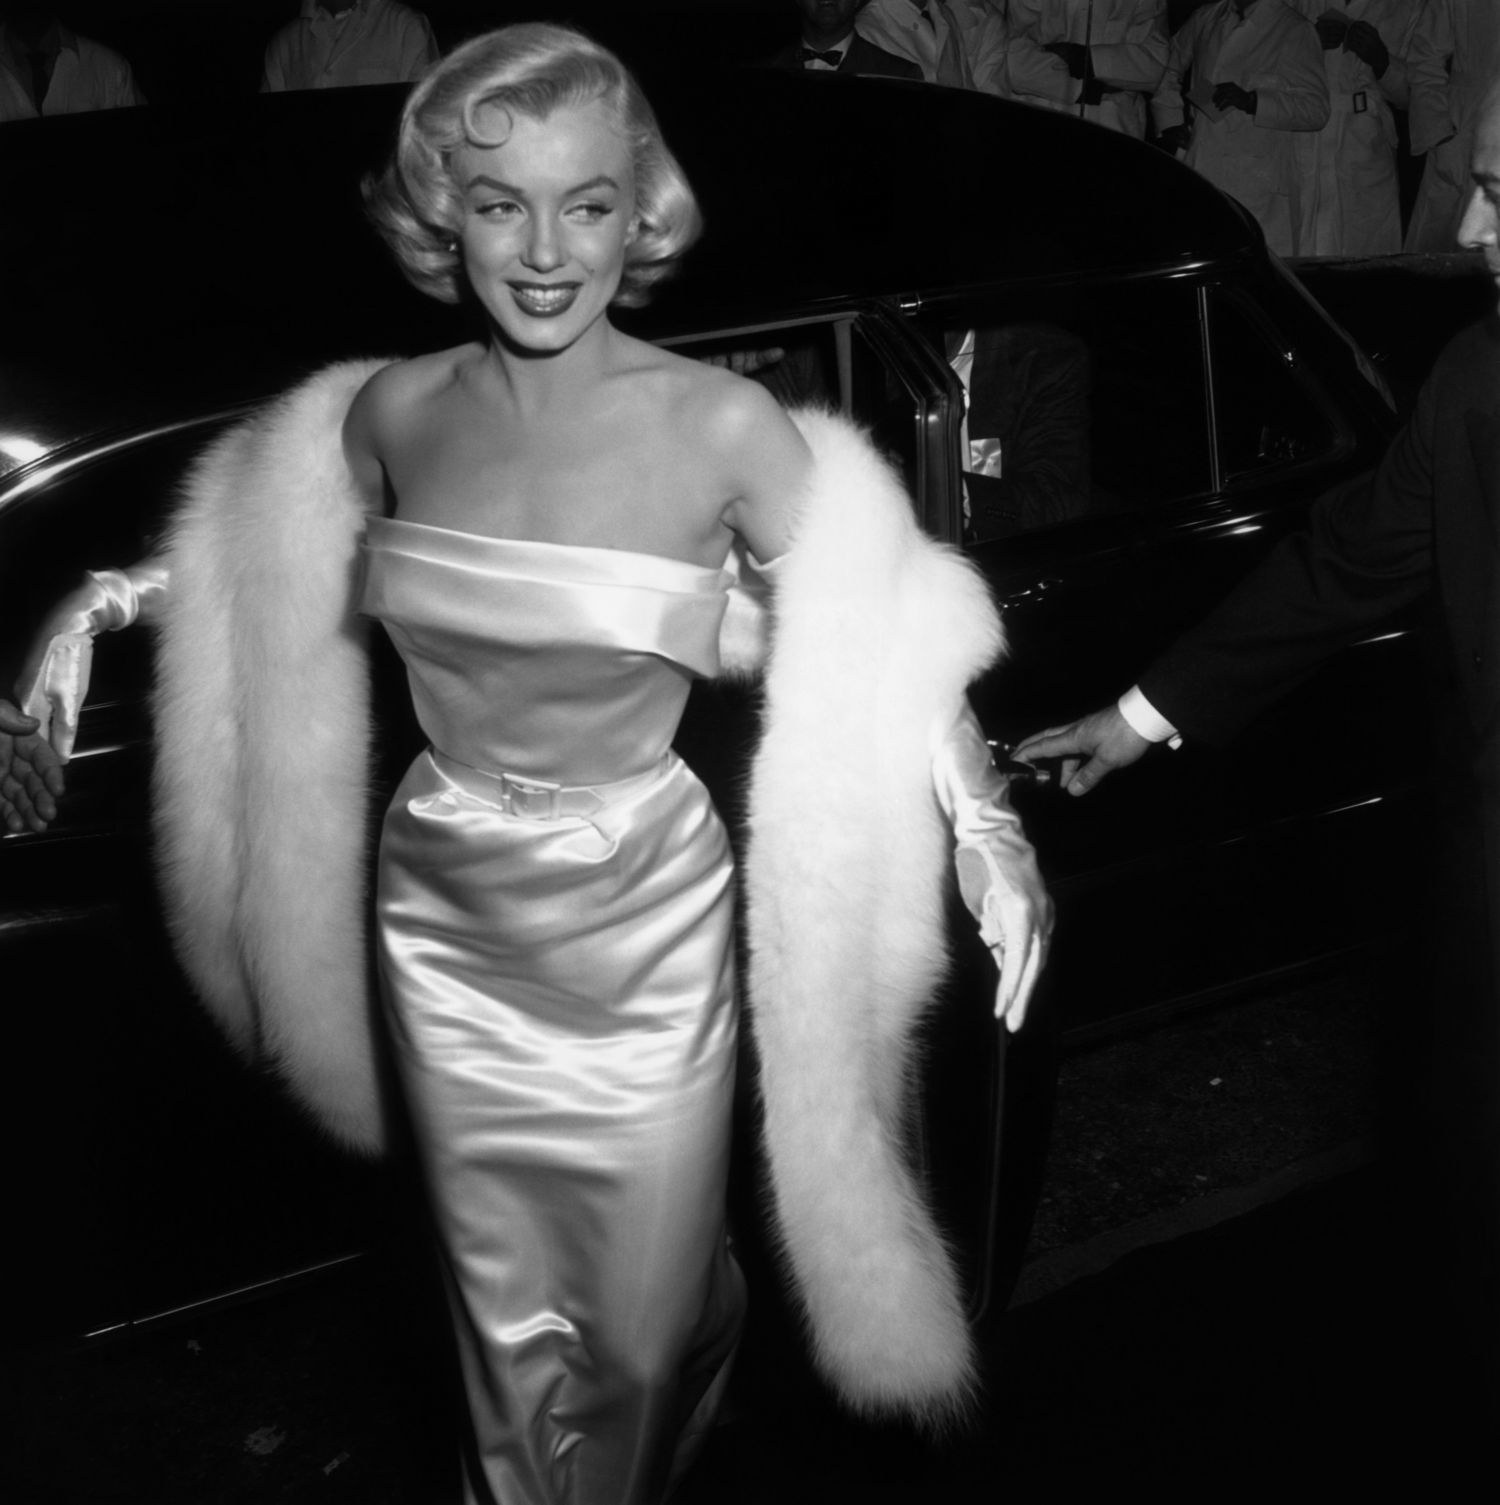 15 Photos That Prove Marilyn Monroe Was, Is, and Always Will Be the Ultimate Style Icon - 15 Photos That Prove Marilyn Monroe Was, Is, and Always Will Be the Ultimate Style Icon -   16 beauty Fashion glamour ideas